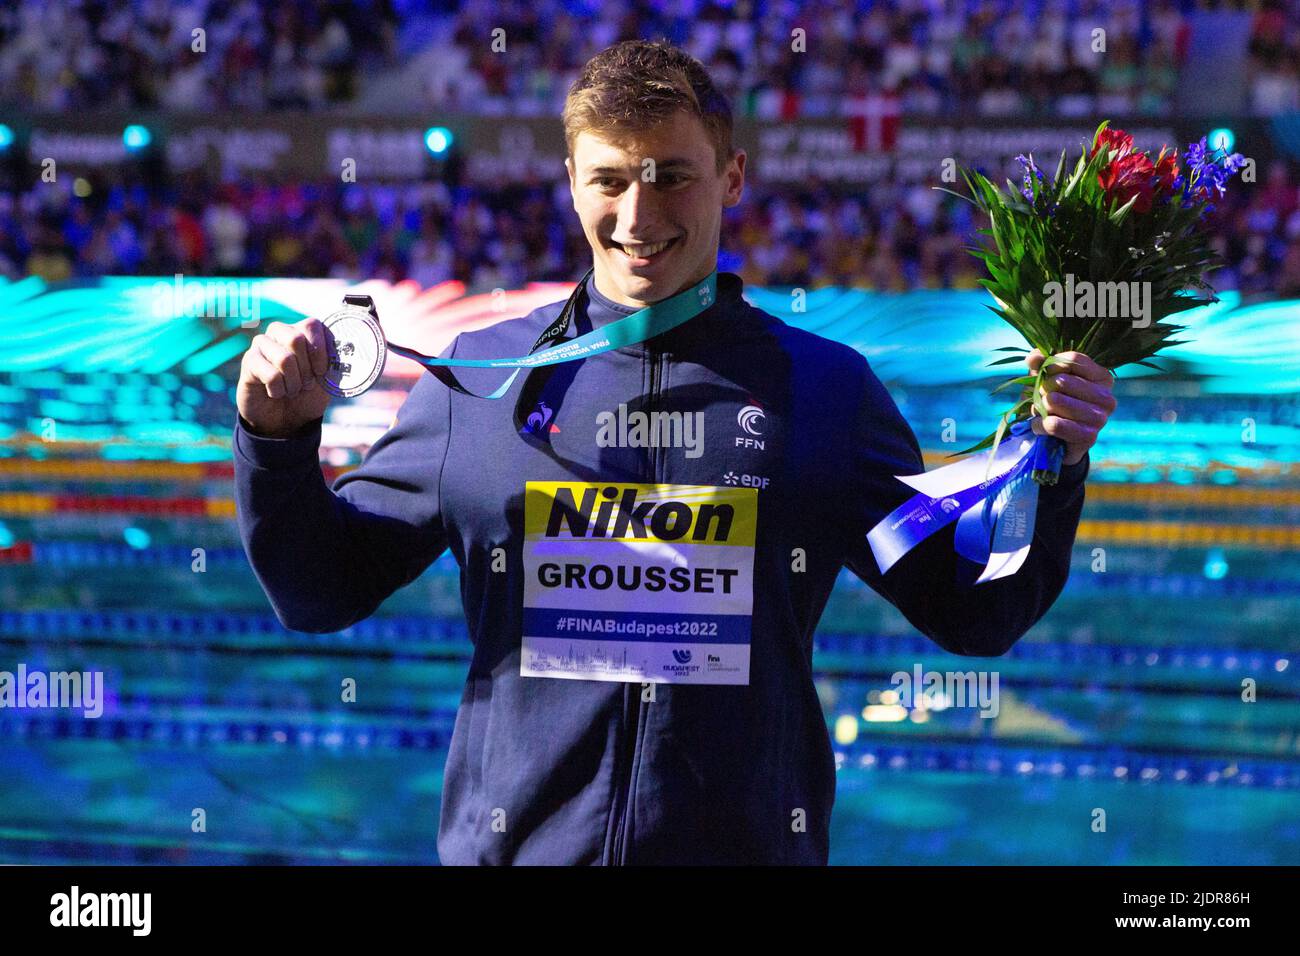 Maxime Grousset of France Podium 100 M Freestyle Men during the 19th FINA World Championships Budapest 2022, Swimming event on June 22, 2022 in Budapest, Hungary. In the 100m NL, Maxime Grousset brought France its fourth world medal in five days of competition. The New Caledonian from Insep, 23, took the silver medal in the queen distance just six hundredths behind the young Romanian prodigy Popovici in 47′’64 for his first individual intercontinental podium. Photo by Laurent Lairys/ABACAPRESS.COM Stock Photo